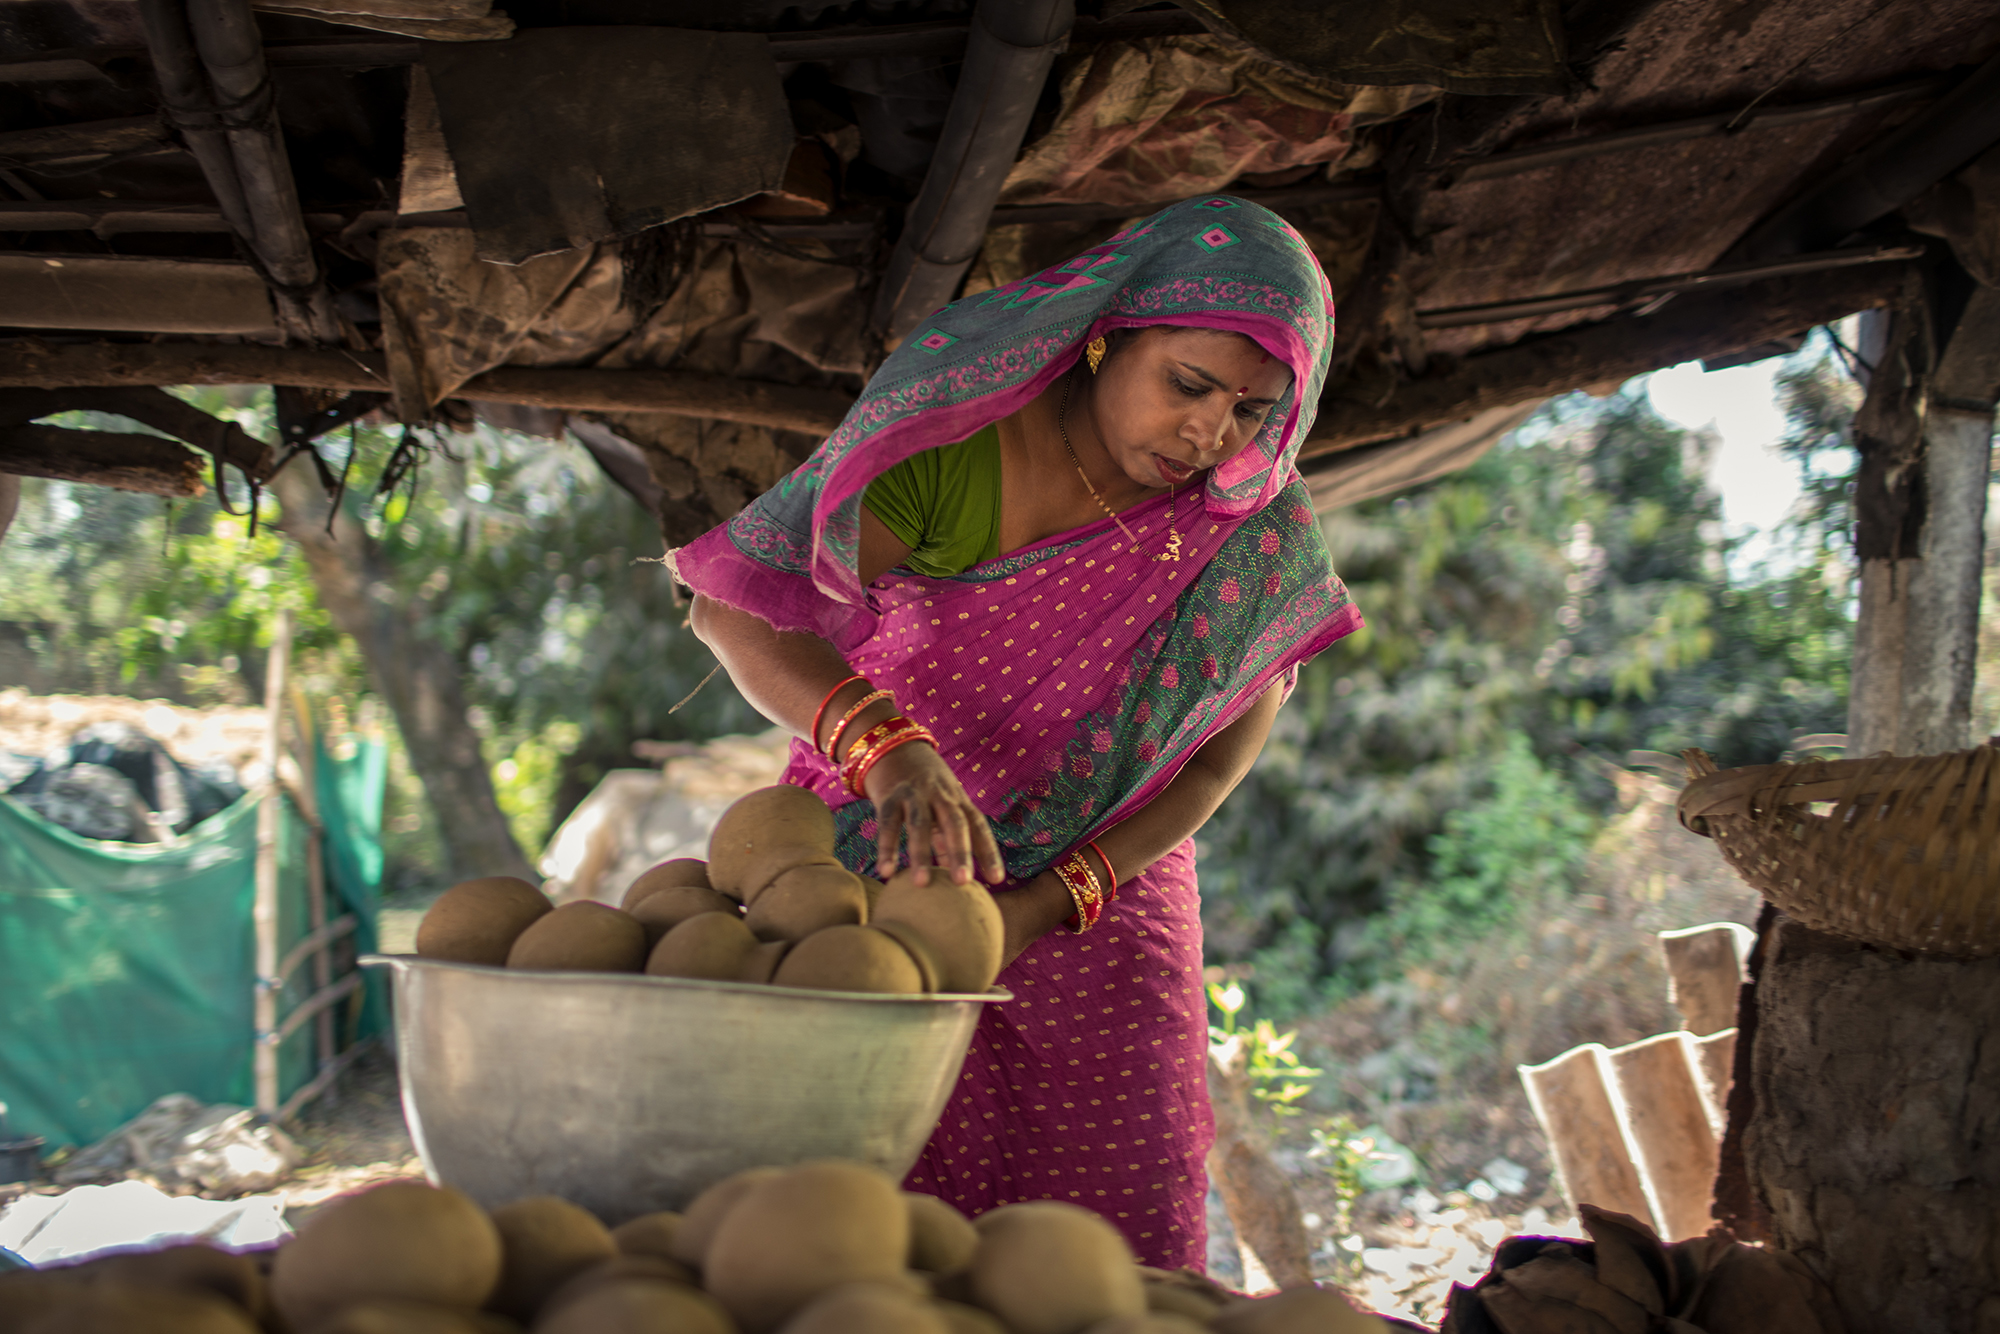 Rina works on her pottery in Odisha, India